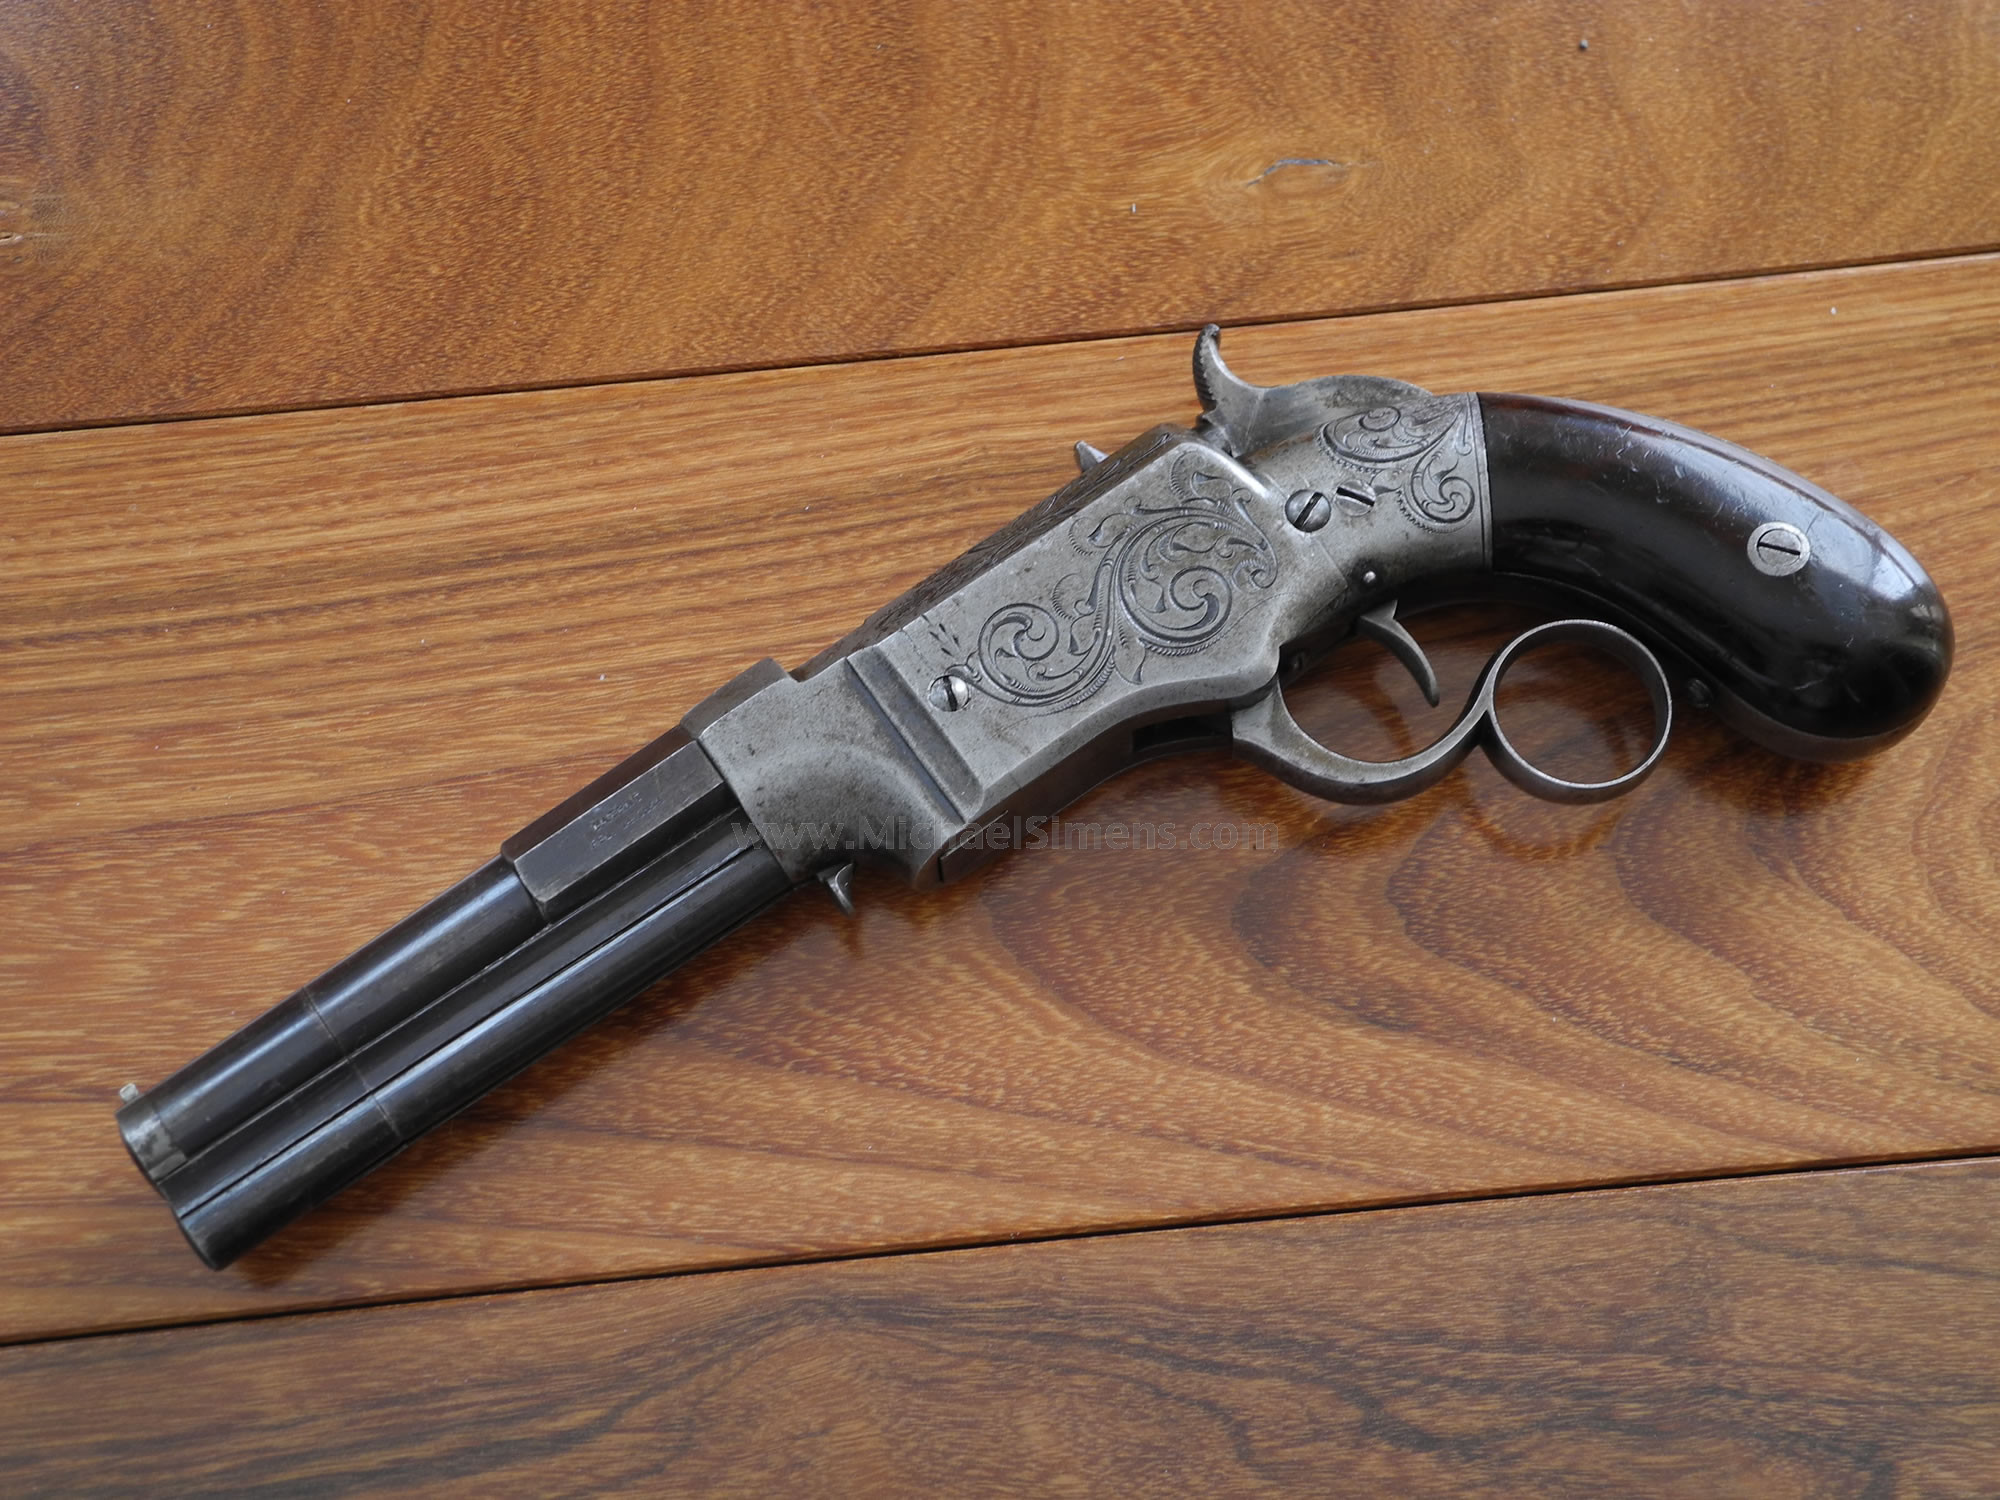 SMALL FRAME SMITH & WESSON VOLCANIC PISTOL